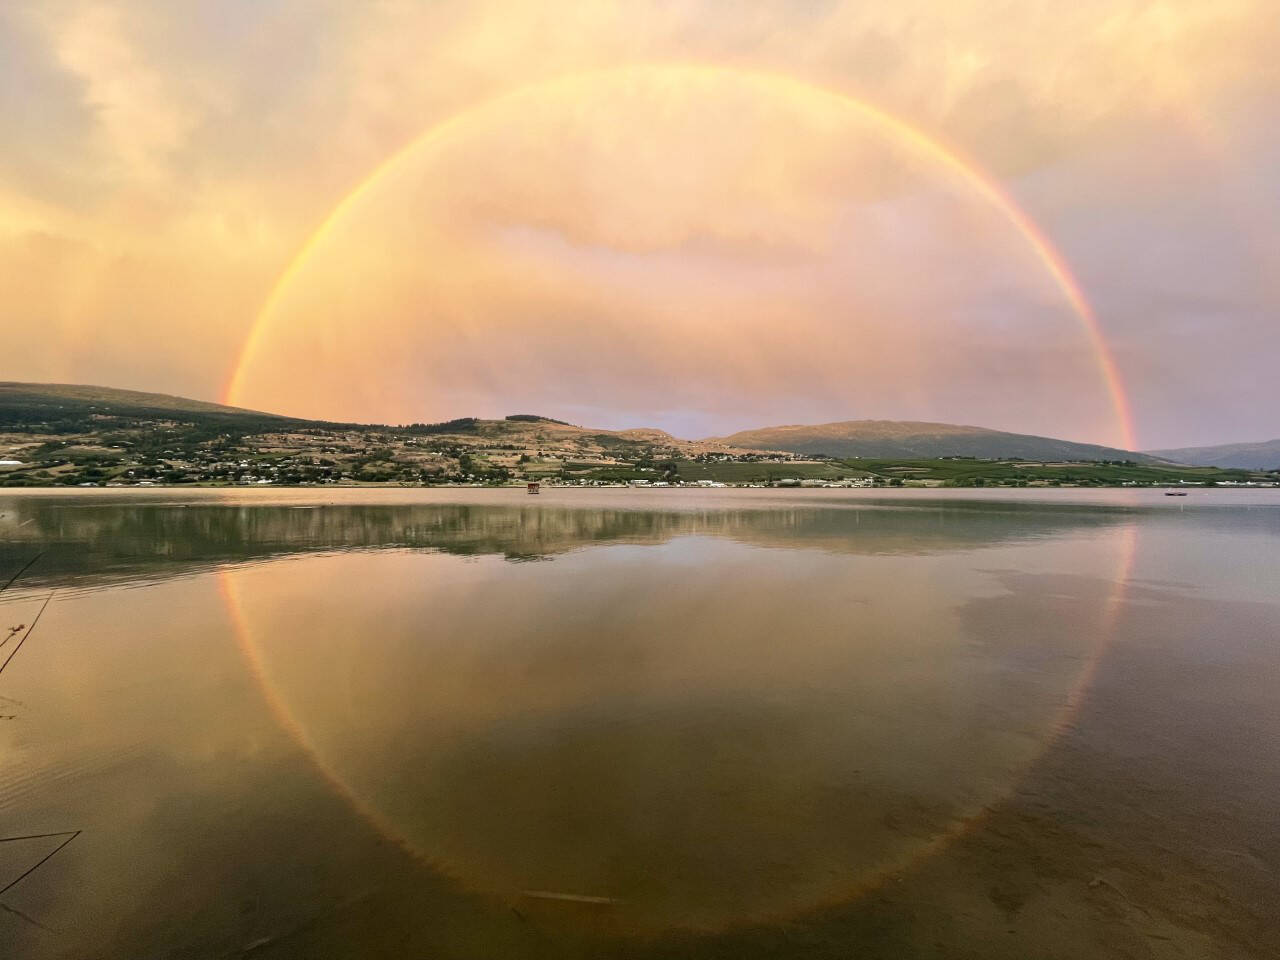 This breathtaking photo of a rainbow reflected onto a lake was taken in Vernon Friday evening, Aug. 19, 2022. (Josh Wielinga photo)